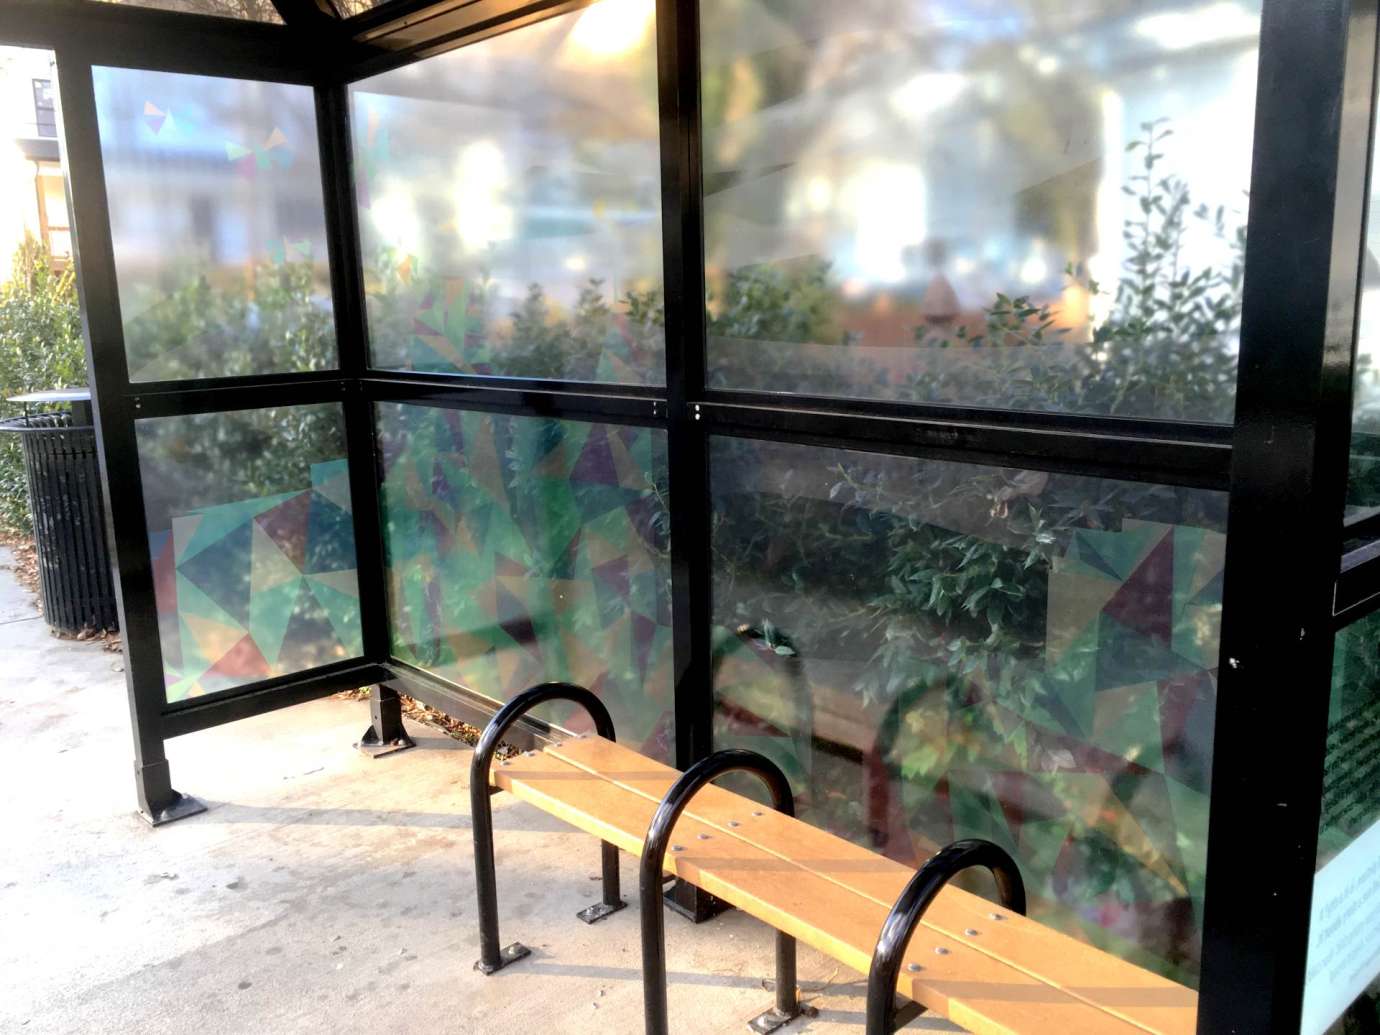 artwork by Fischer covering the windows of a bus shelter